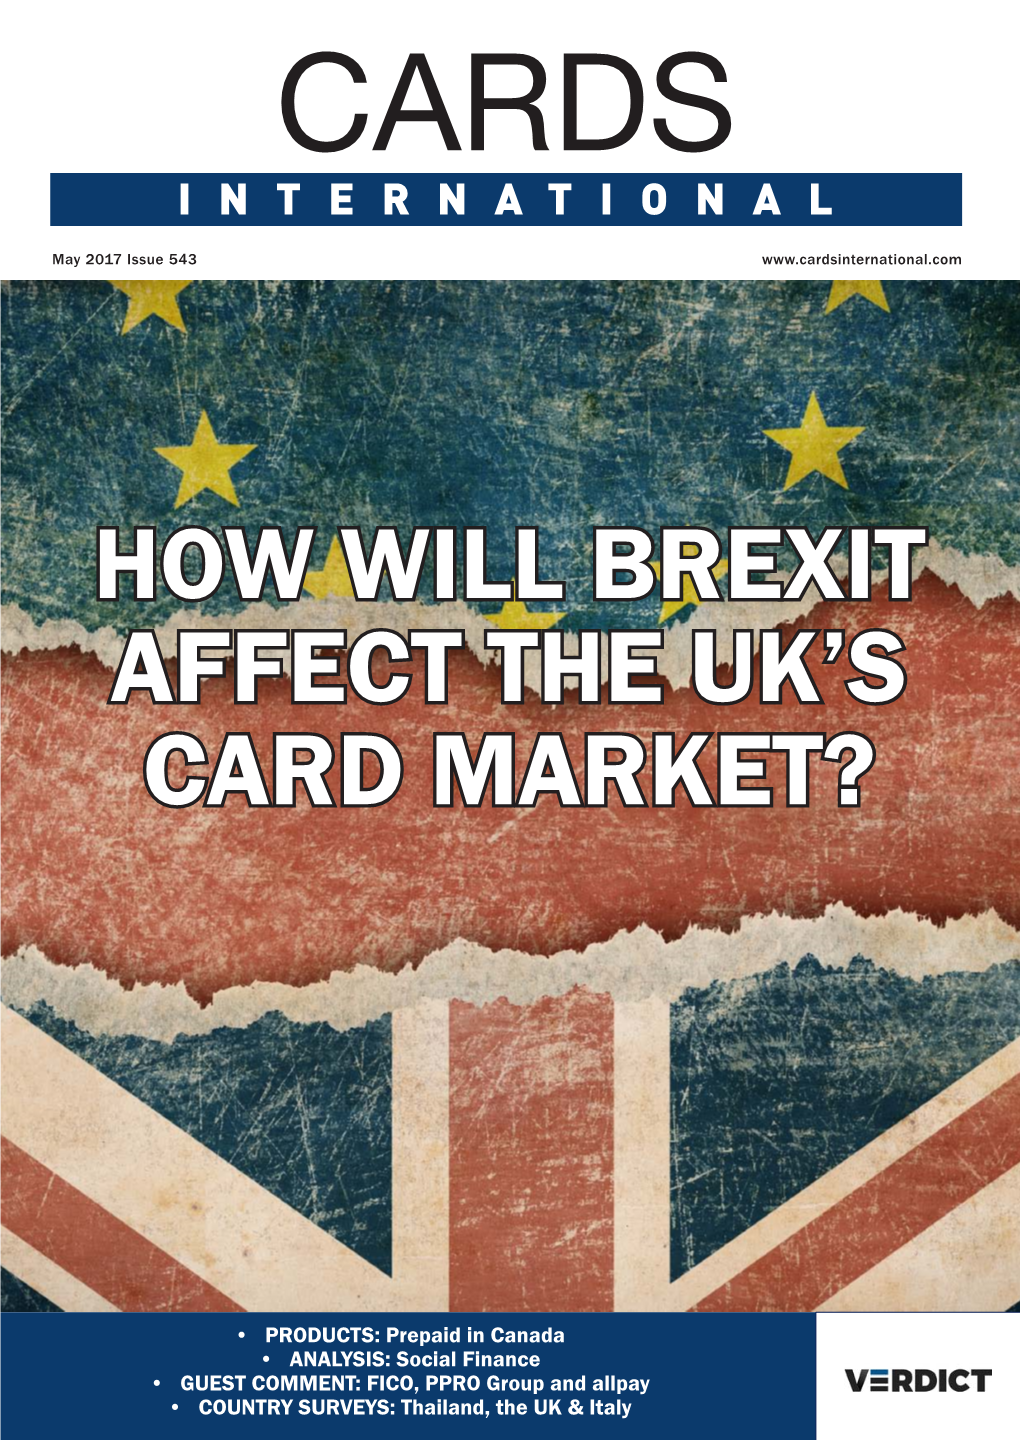 How Will Brexit Affect the Uk's Card Market?